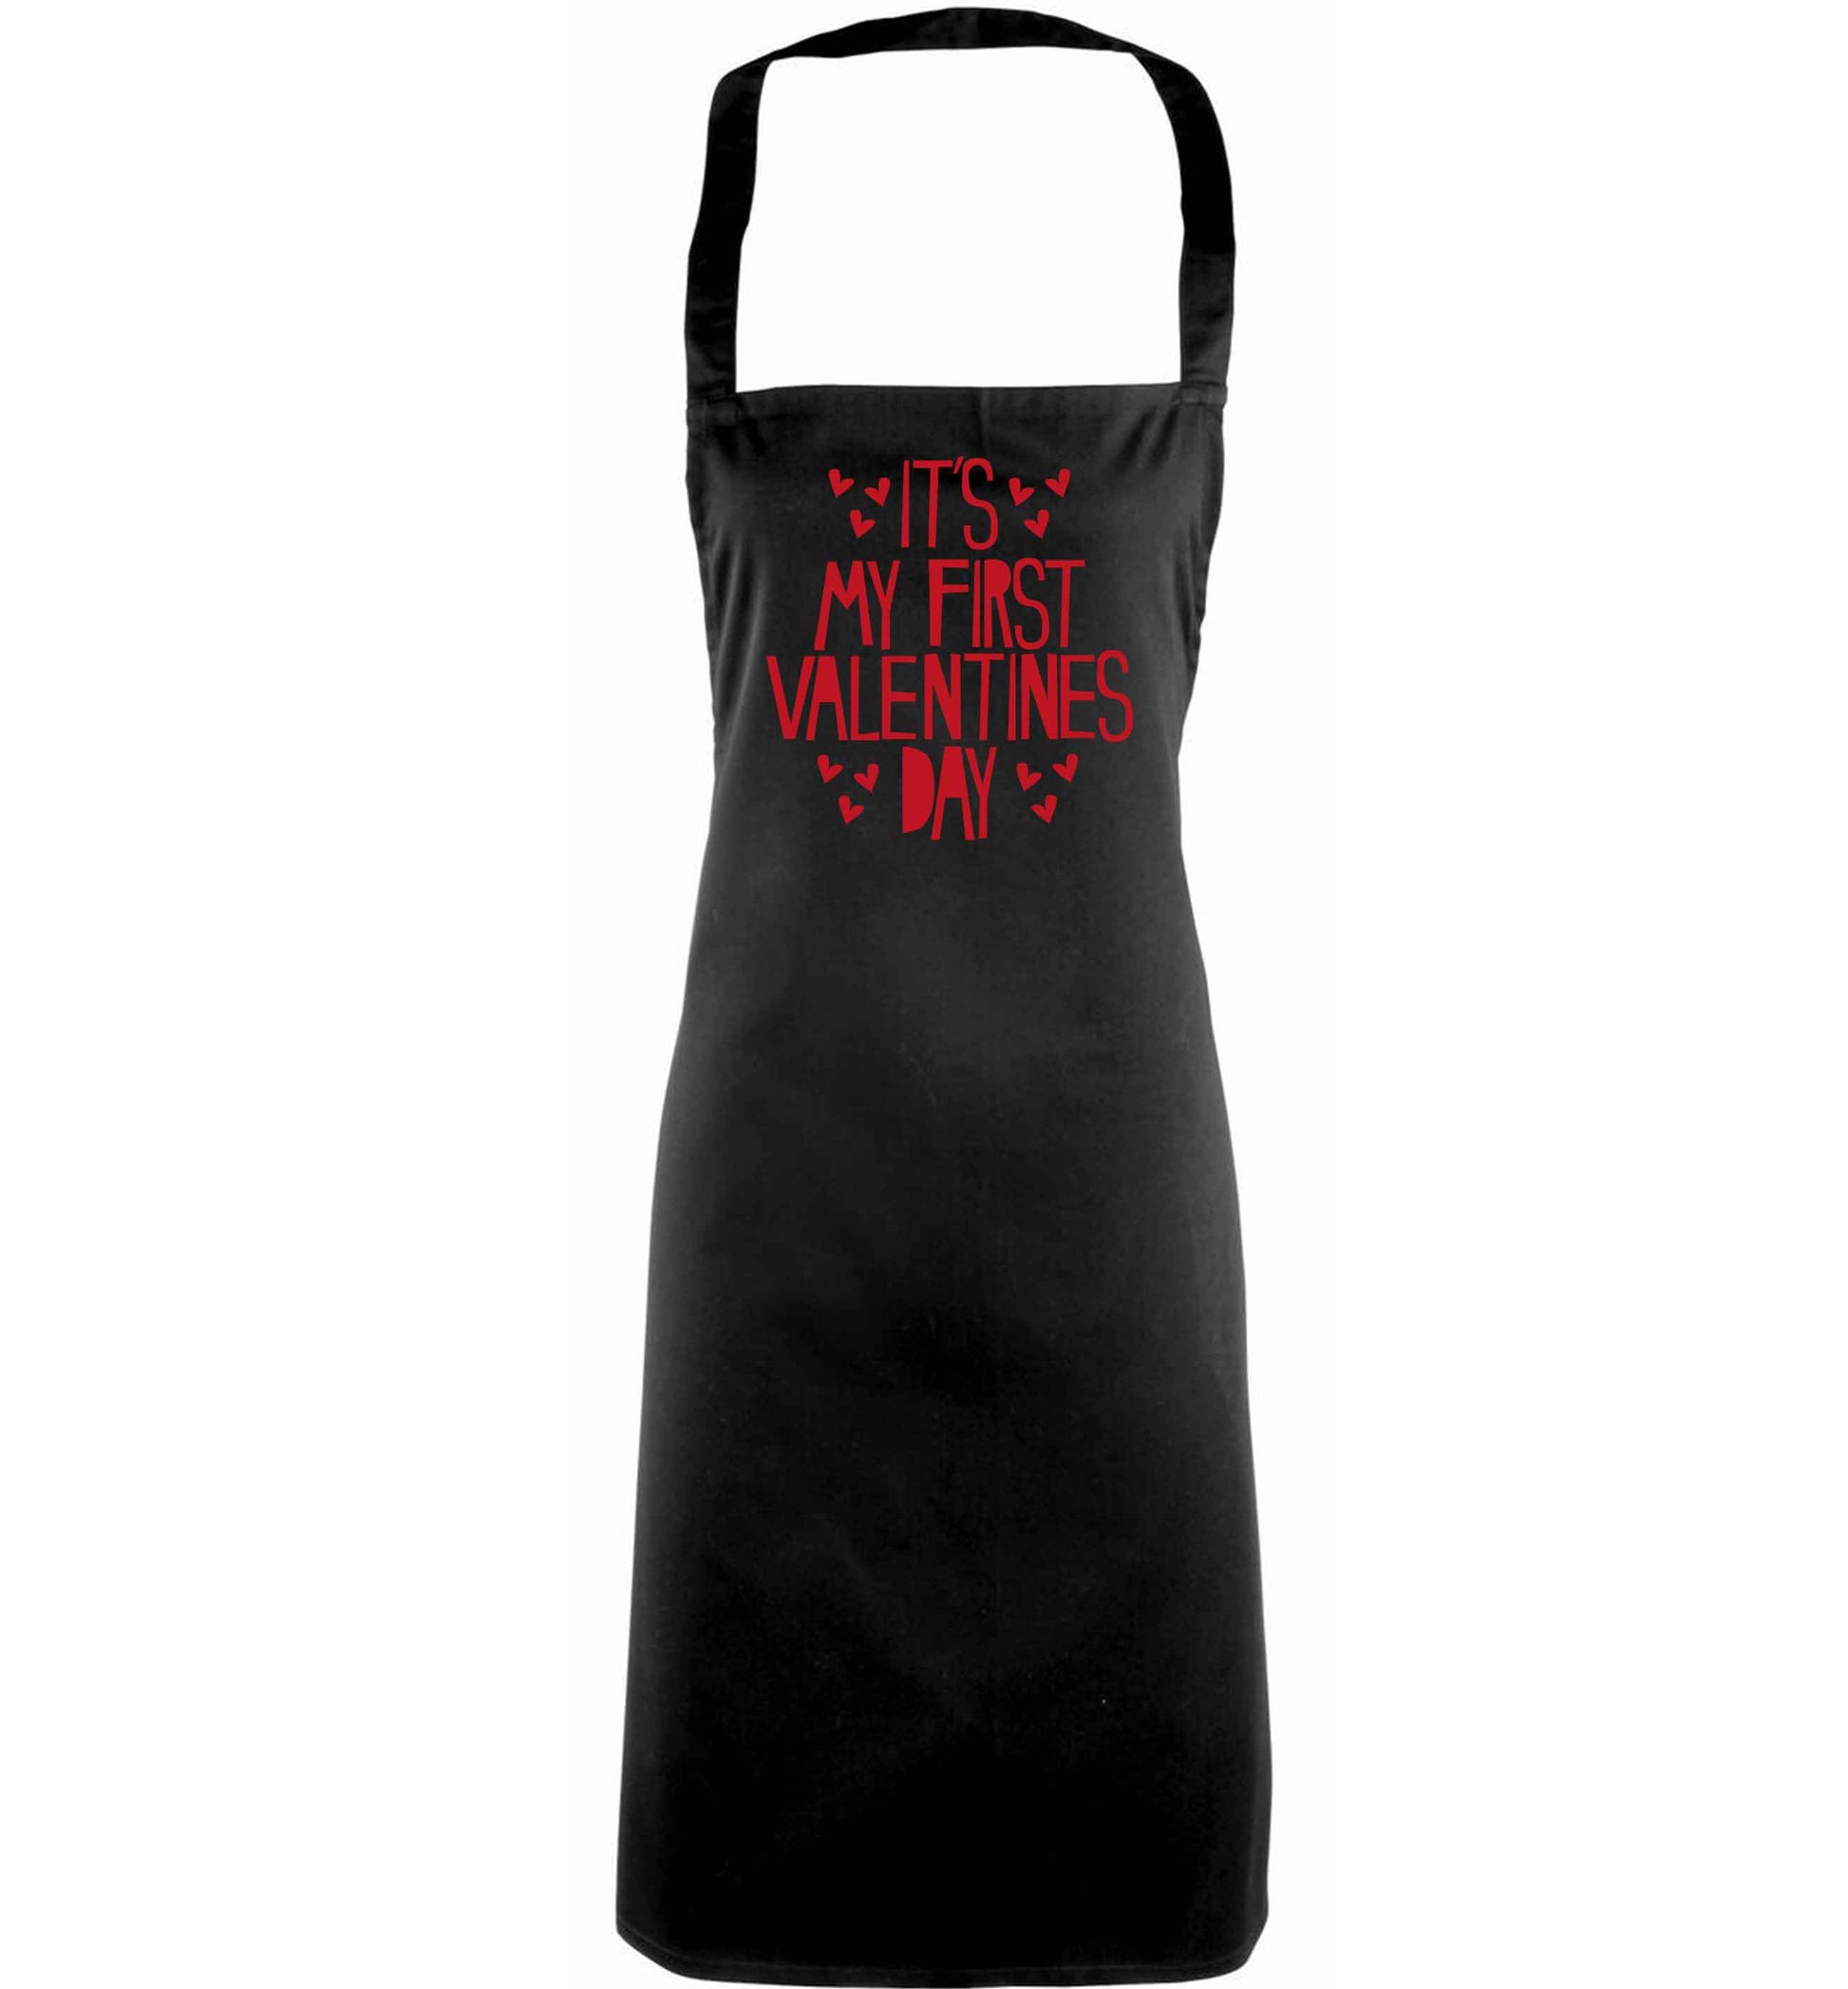 Hearts It's my First Valentine's Day adults black apron